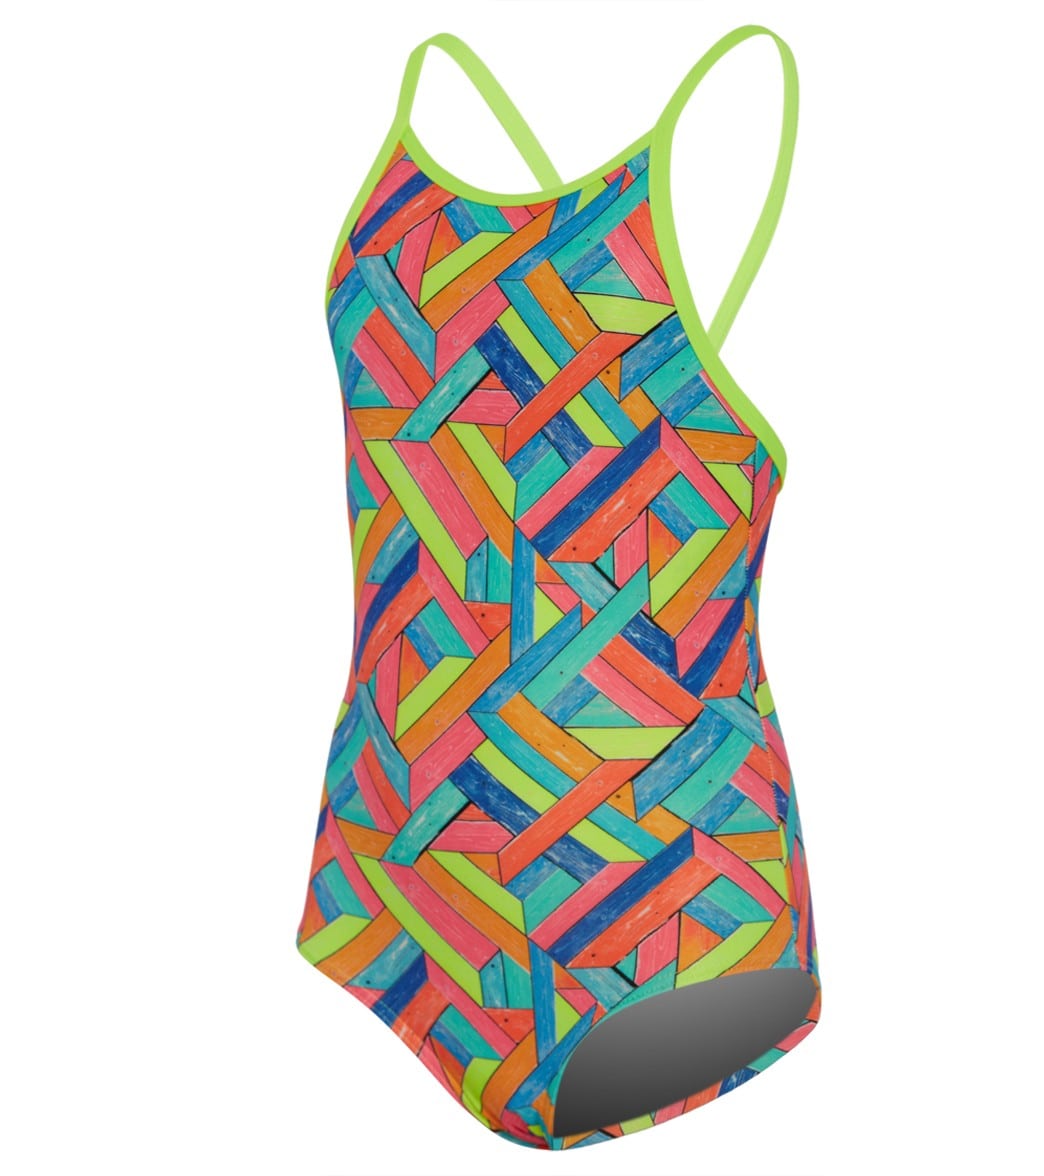 Funkita Toddler Girls' Panel Pop Printed One Piece Swimsuit - Multi 2 Polyester - Swimoutlet.com